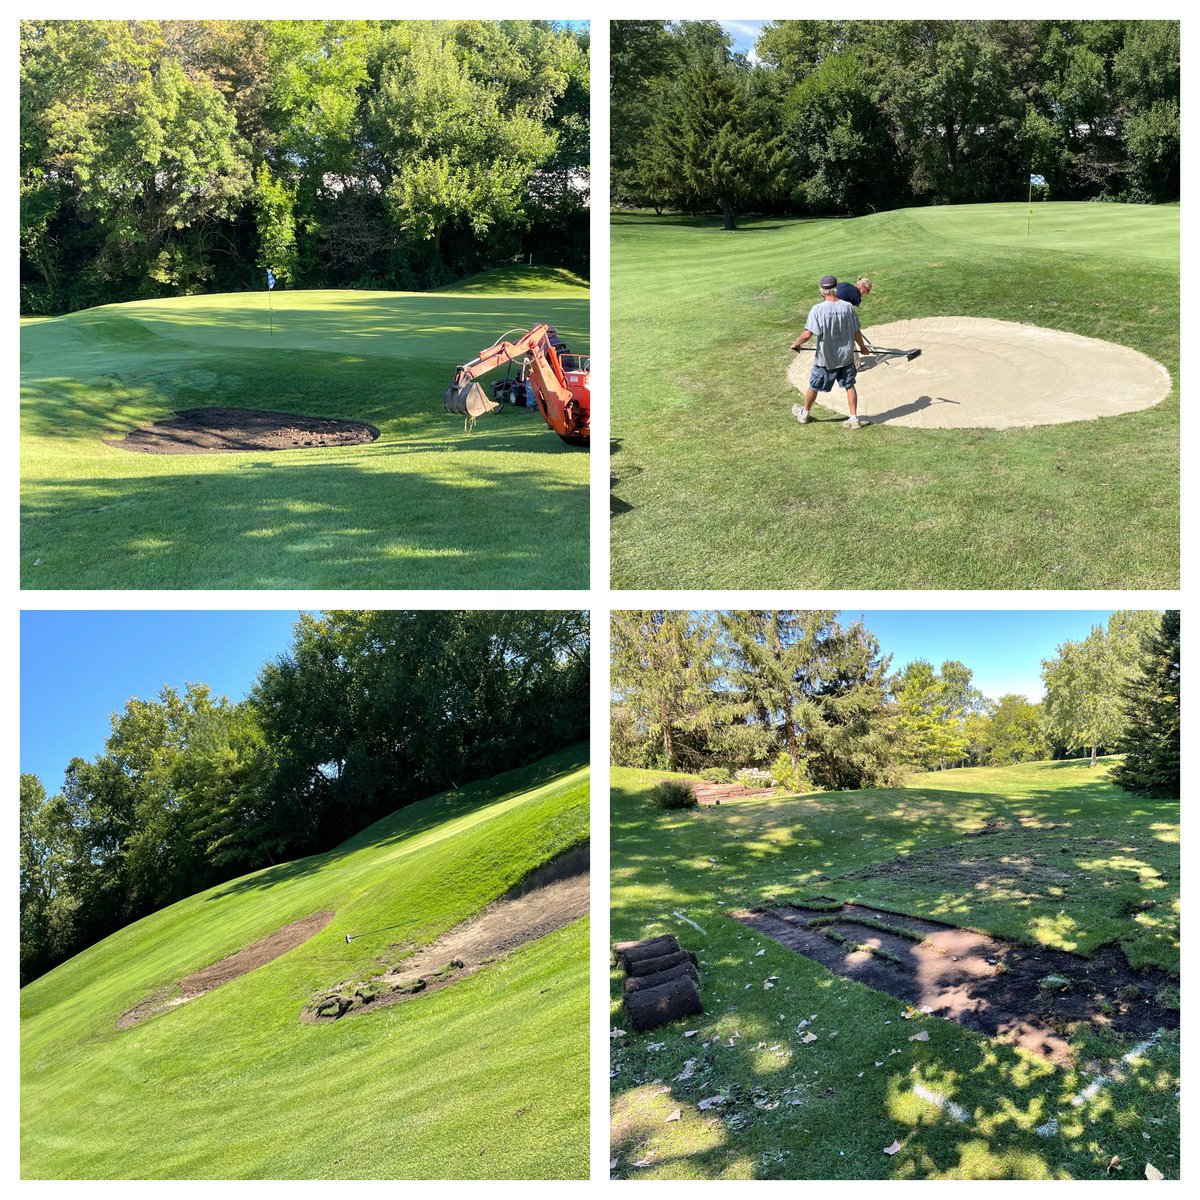 MB - Behind the Scenes. A few of our fall projects. Hole #8 (new bunker completed), #18 green side bunkers, #7 tee. #progress #playgolfanderson